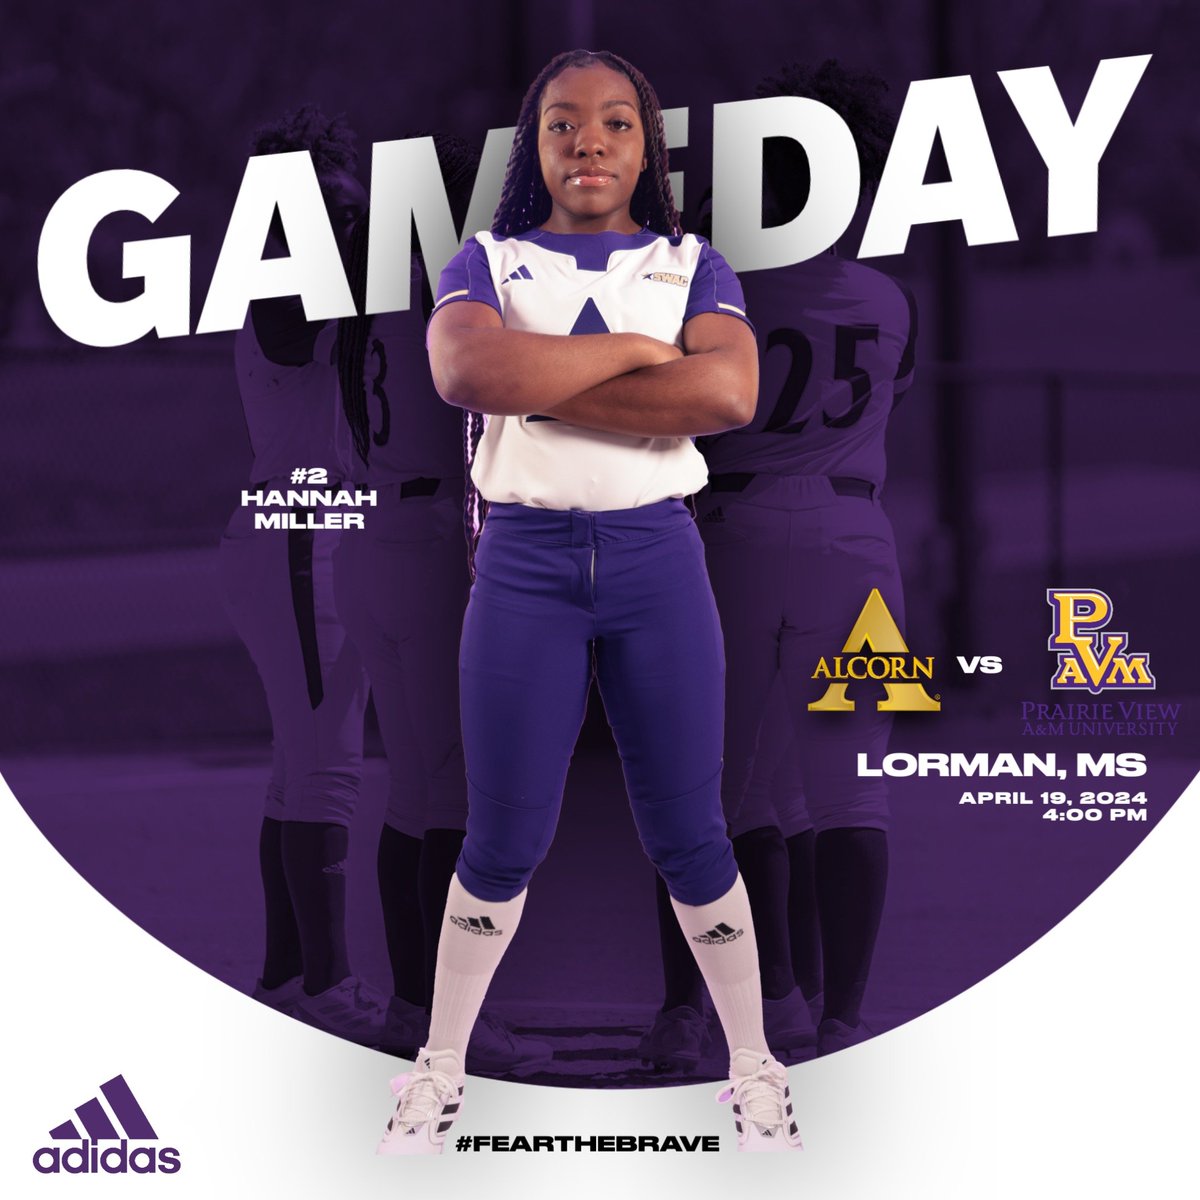 🚨 GAMEDAY 🚨

🆚️ @PVAMUPanthers
⏰: 4:00 PM
📍: Lorman, MS

#FearTheBrave #SWACSB